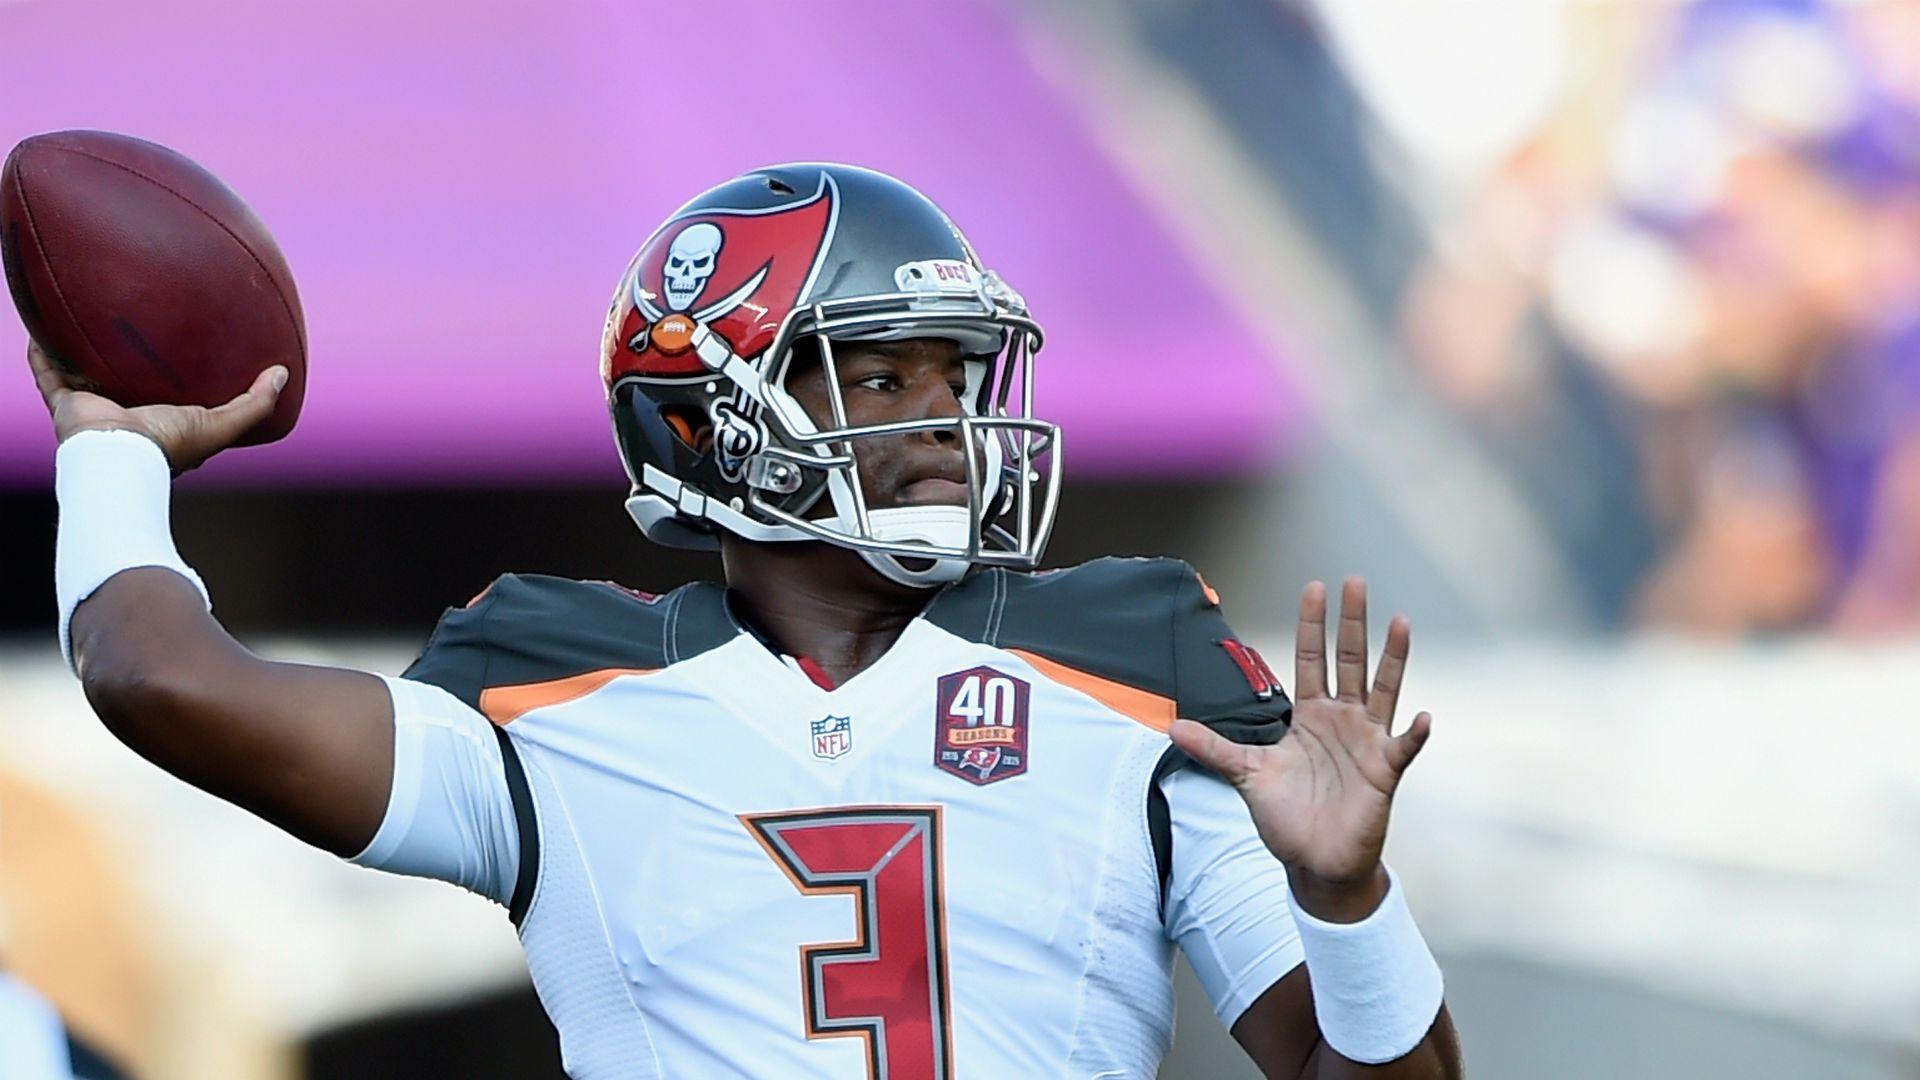 Jameis Winston throws a bomb and interception in uneven Bucs start